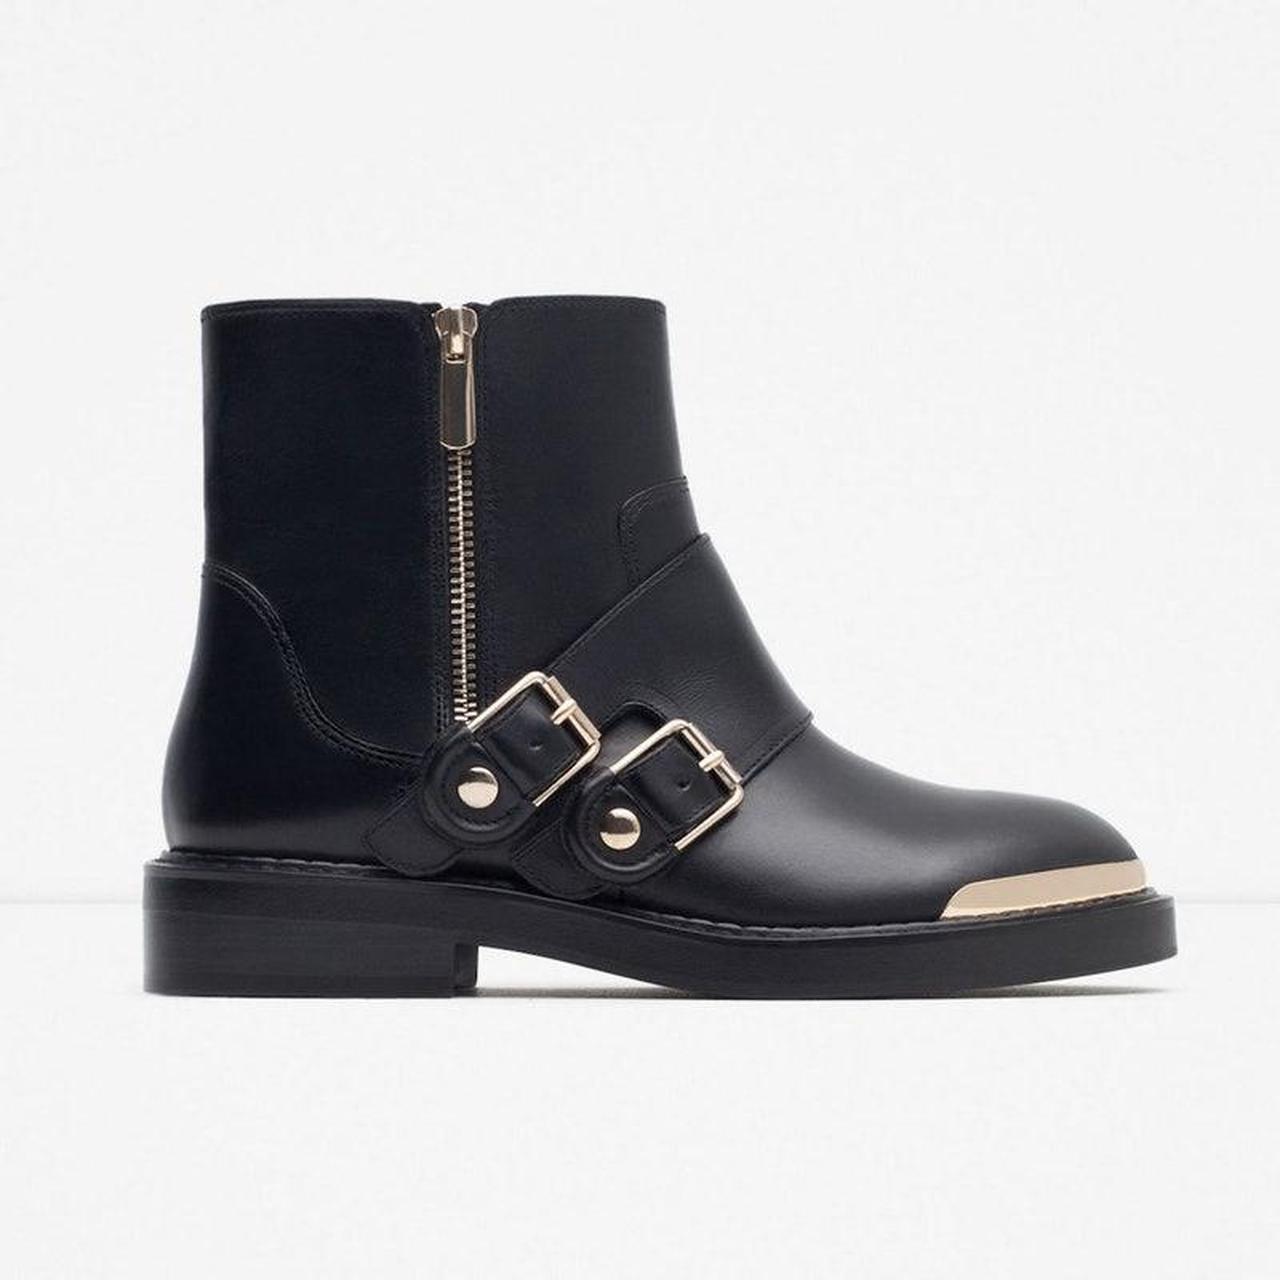 Zara Women's Black and Gold Boots